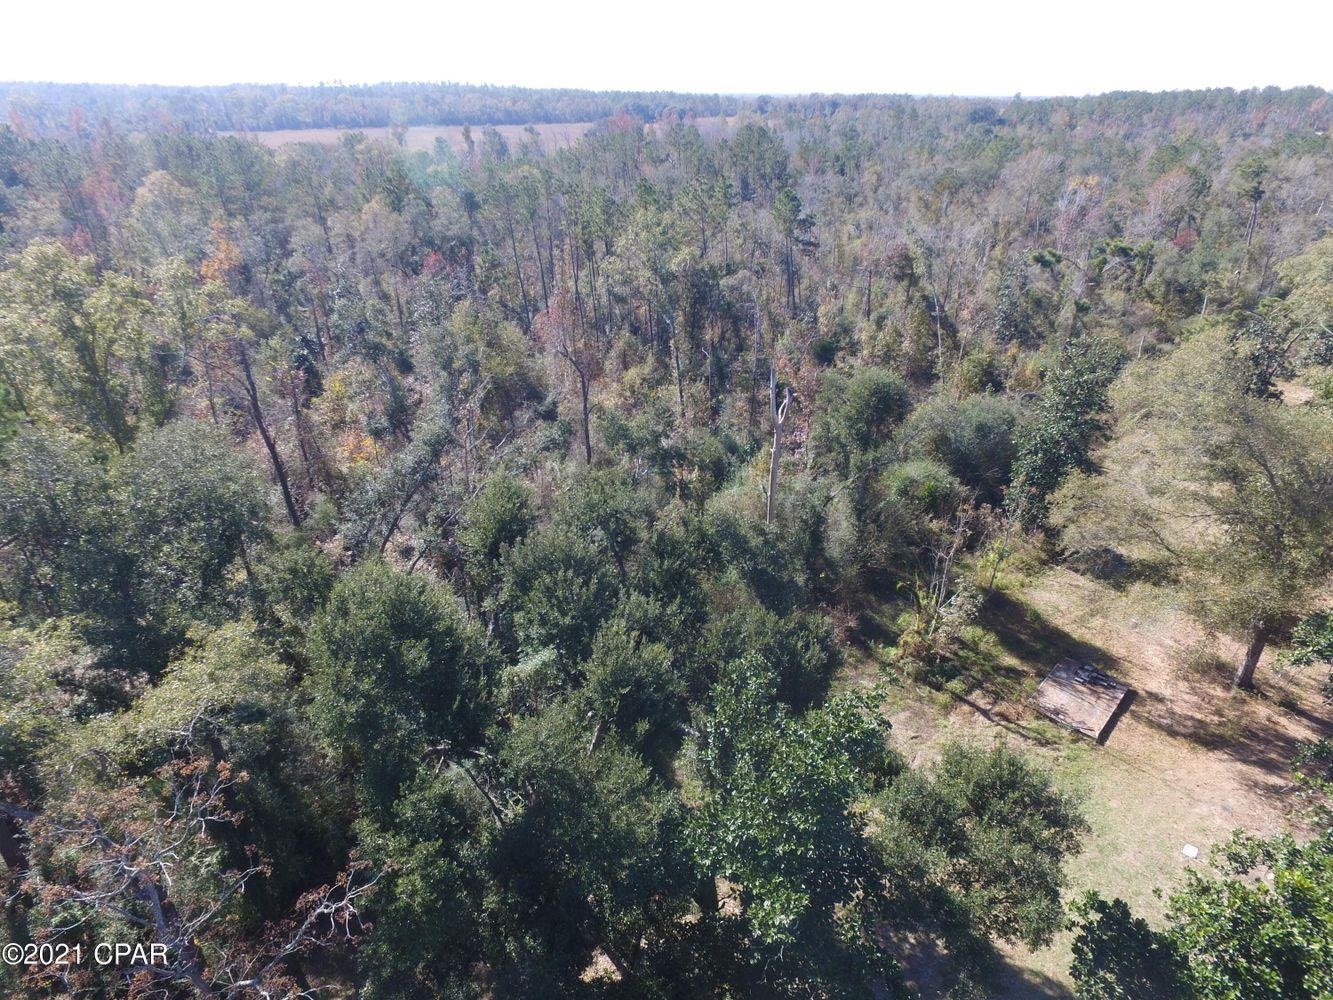 19 Beautifully timbered acres in Cottondale. This lot has no deed restrictions and was once a homesite. Property has a well and power already on the property. There is an older septic tank on the property that owner knows nothing about and does not warranty septic system. Buy to build, hunt or hold.